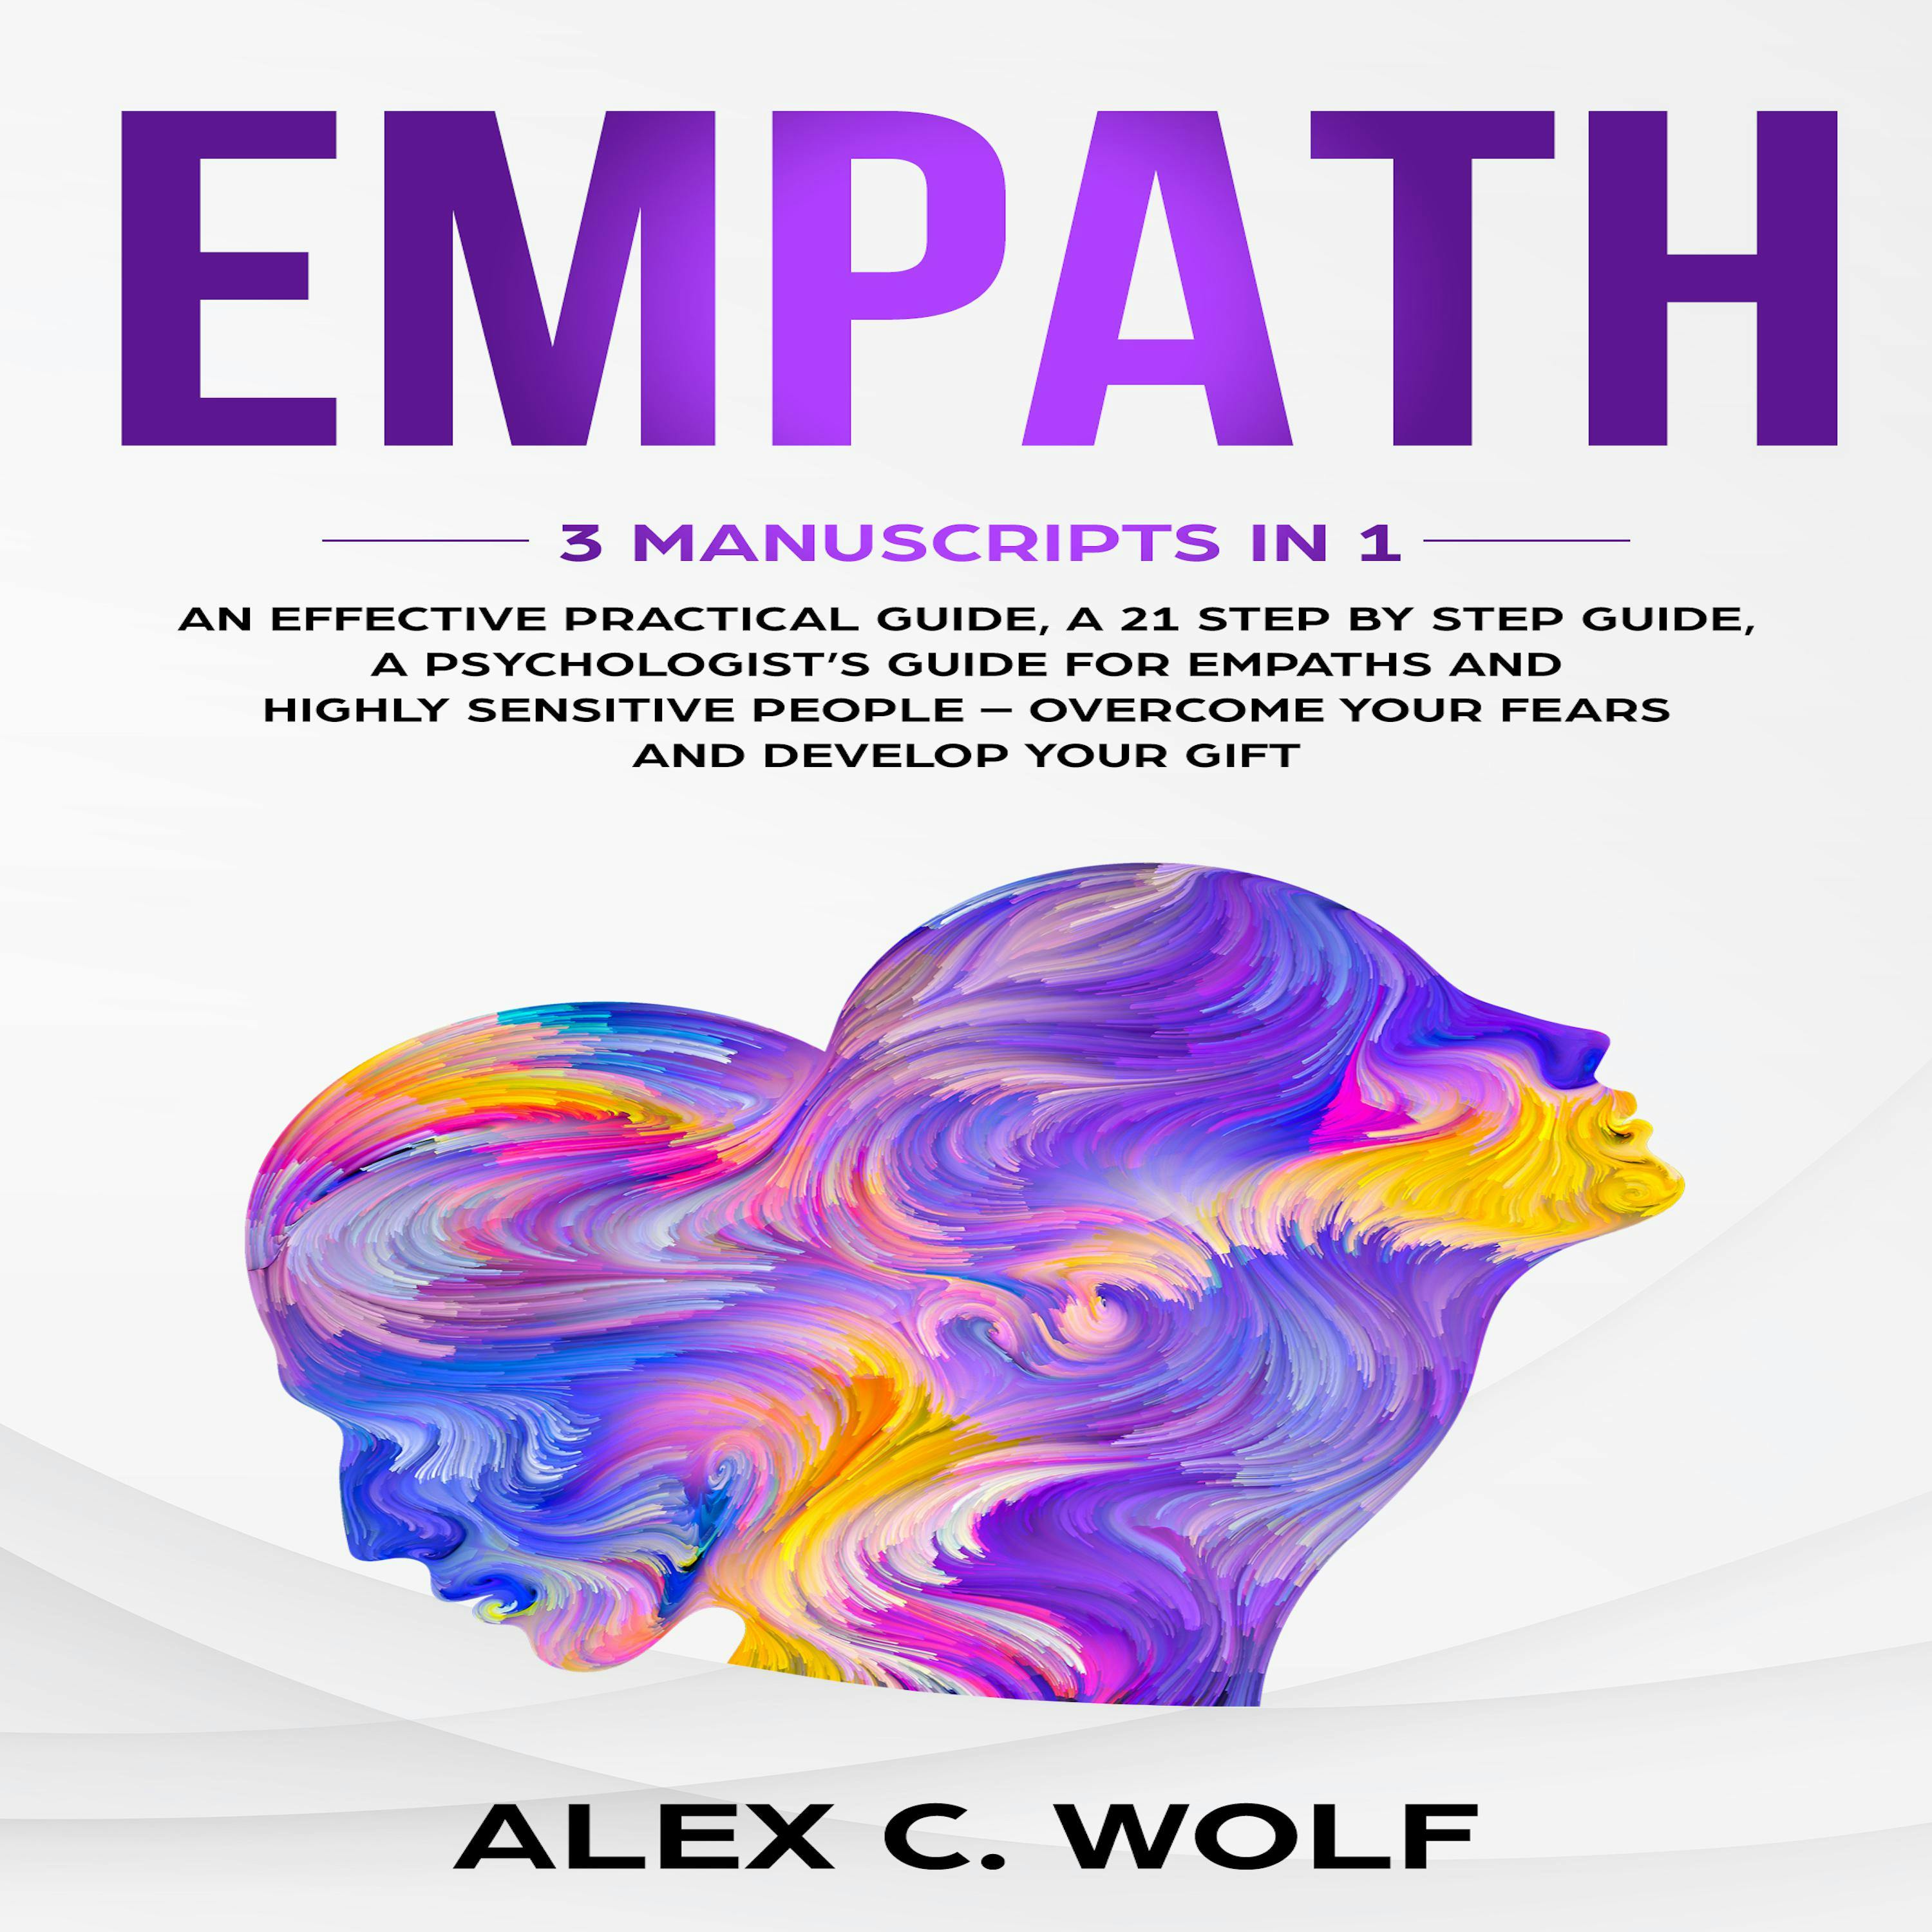 Empath: 3 Manuscripts in 1 - An Effective Practical Guide + A 21 Step by Step Guide + A Psychologist’s Guide for Empaths and Highly Sensitive People – Overcome Your Fears and Develop Your Gift - Alex C. Wolf